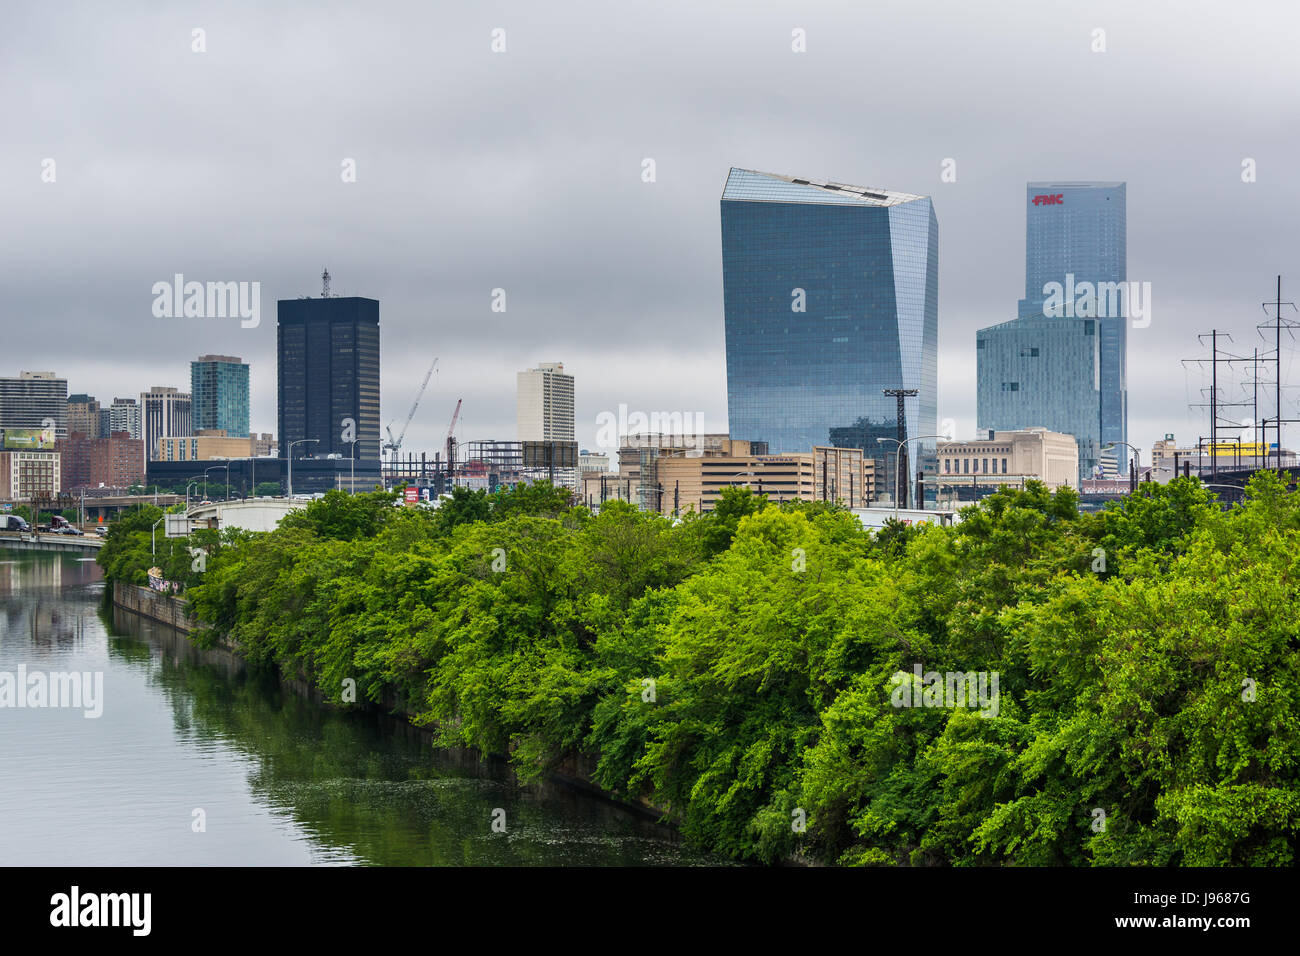 The Schuylkill River and buildings in West Philadelphia, Pennsylvania. Stock Photo